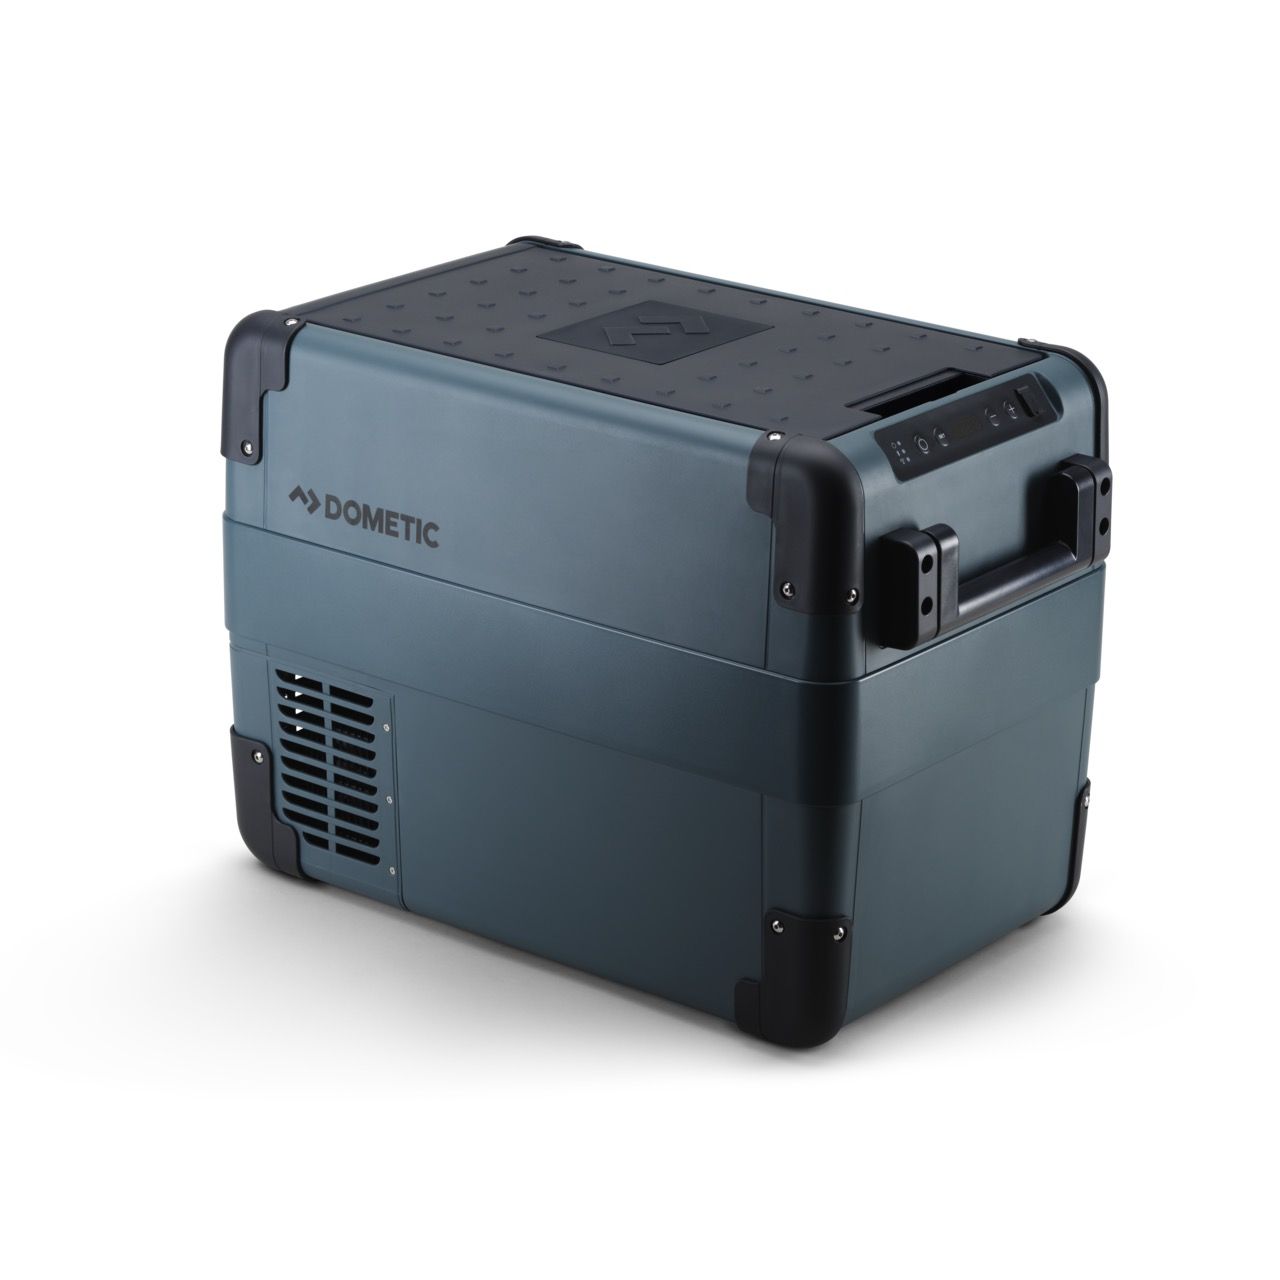 CFX2 28 Electric Cooler - by Dometic